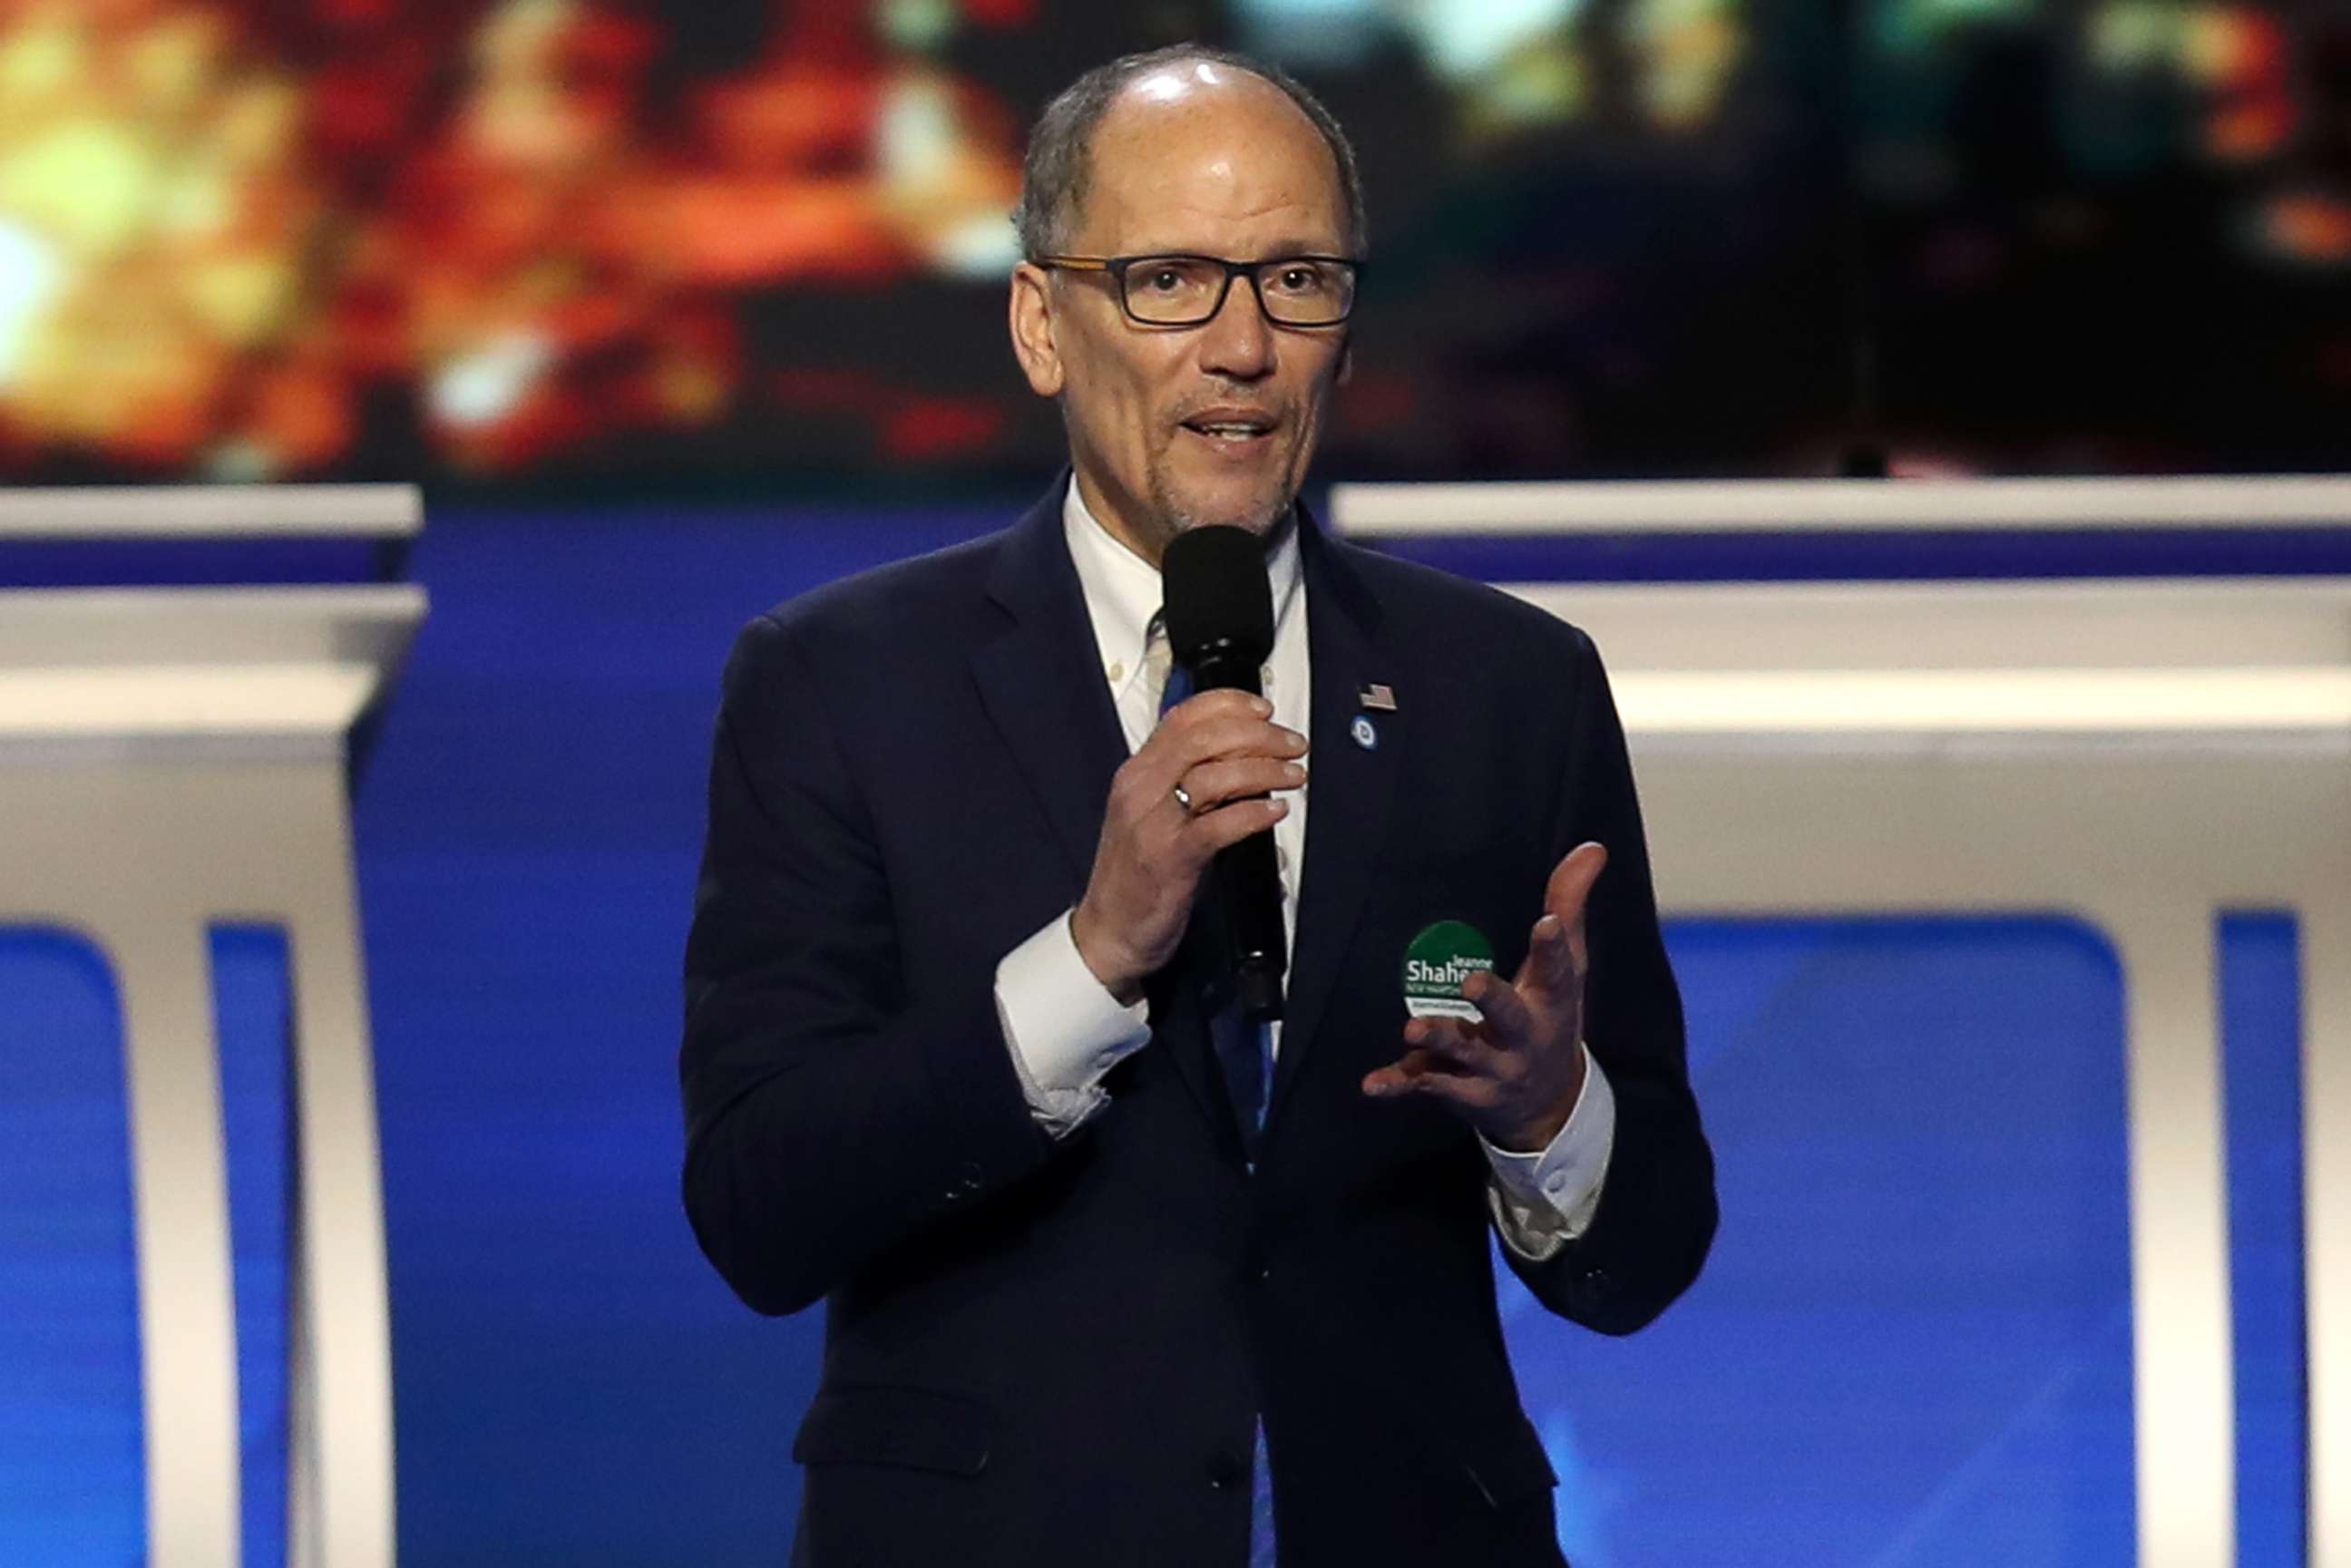 PHOTO: Chair of the Democratic National Committee Tom Perez speaks prior to the Democratic presidential primary debate in the Sullivan Arena at St. Anselm College on February 07, 2020 in Manchester, New Hampshire.